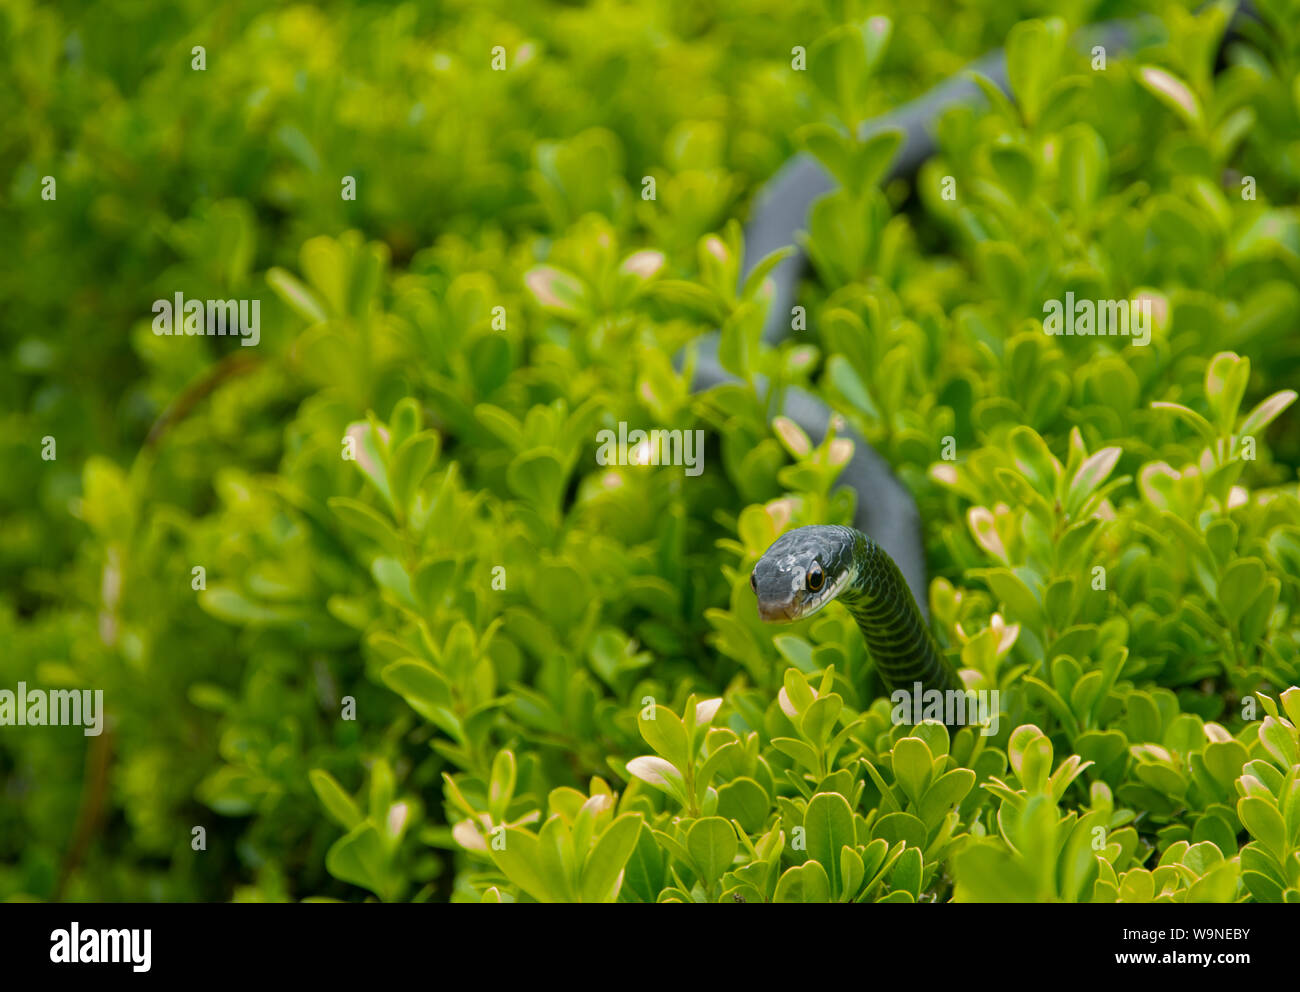 A black racer snake is a common garden snake in Florida. It is hanging out in a bush. Stock Photo